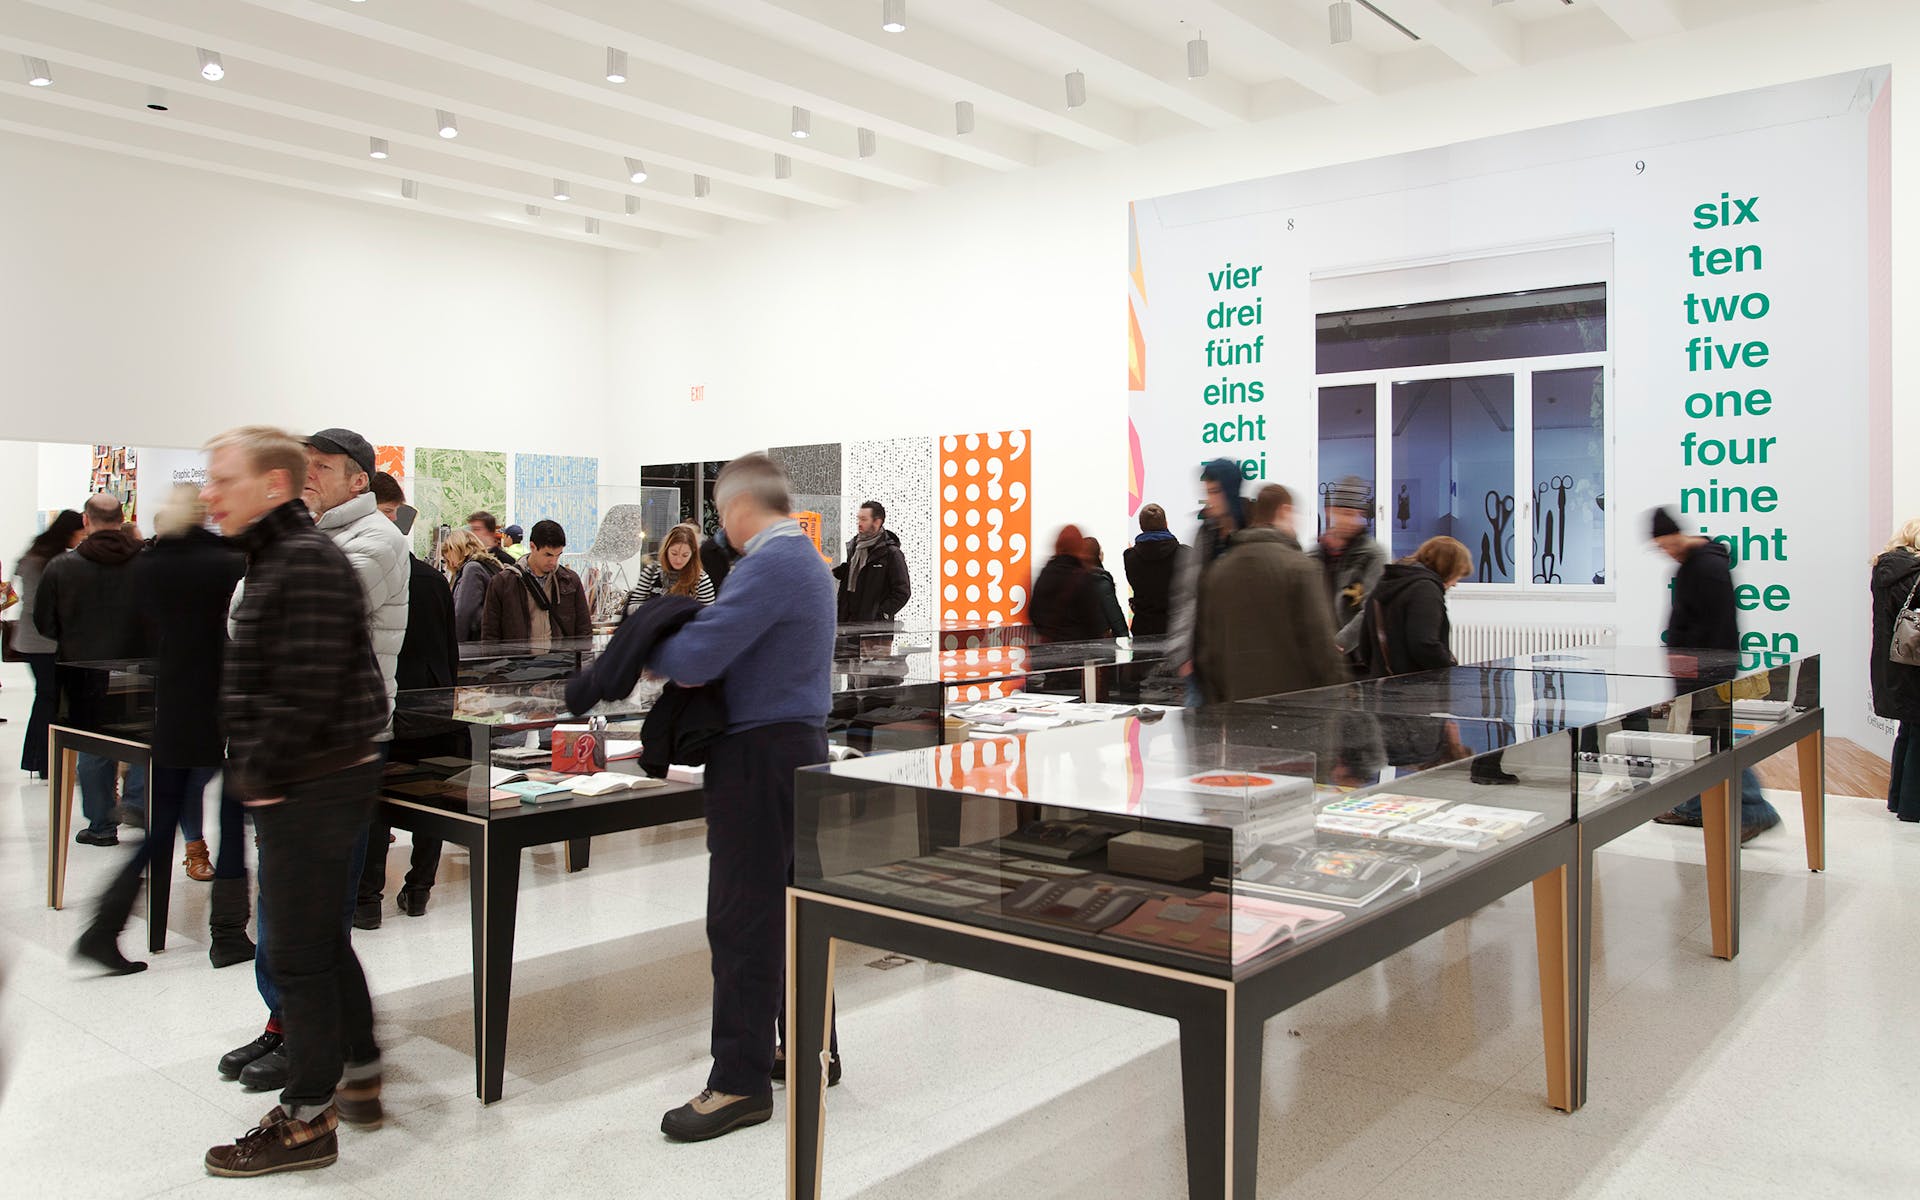 Installation view of the exhibition Graphic Design: Now in Production, 2011 (Photo: Gene Pittman, ©Walker Art Center)